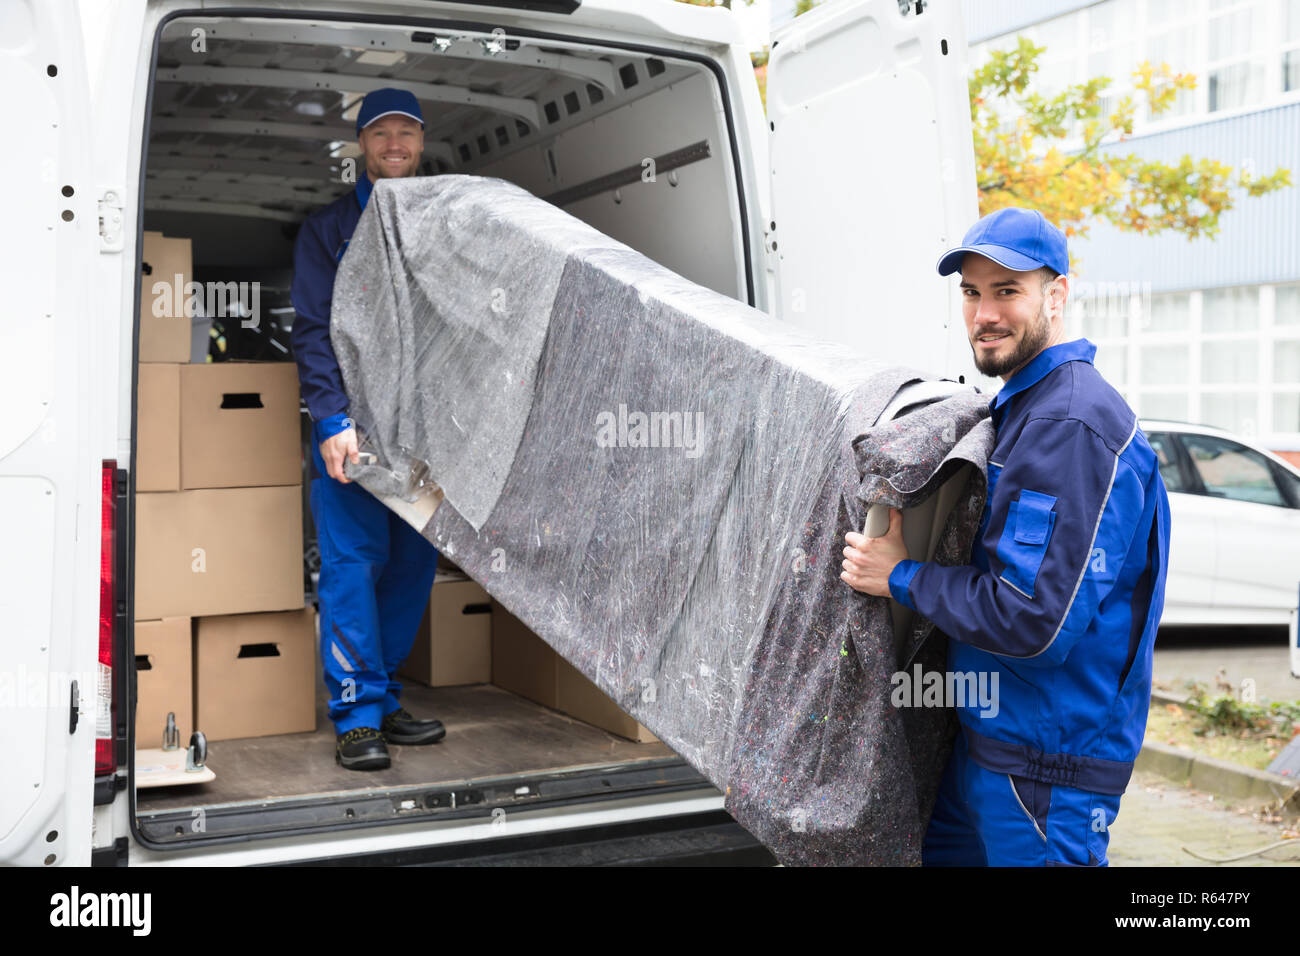 Two Delivery Men Unloading Furniture From Vehicle Stock Photo